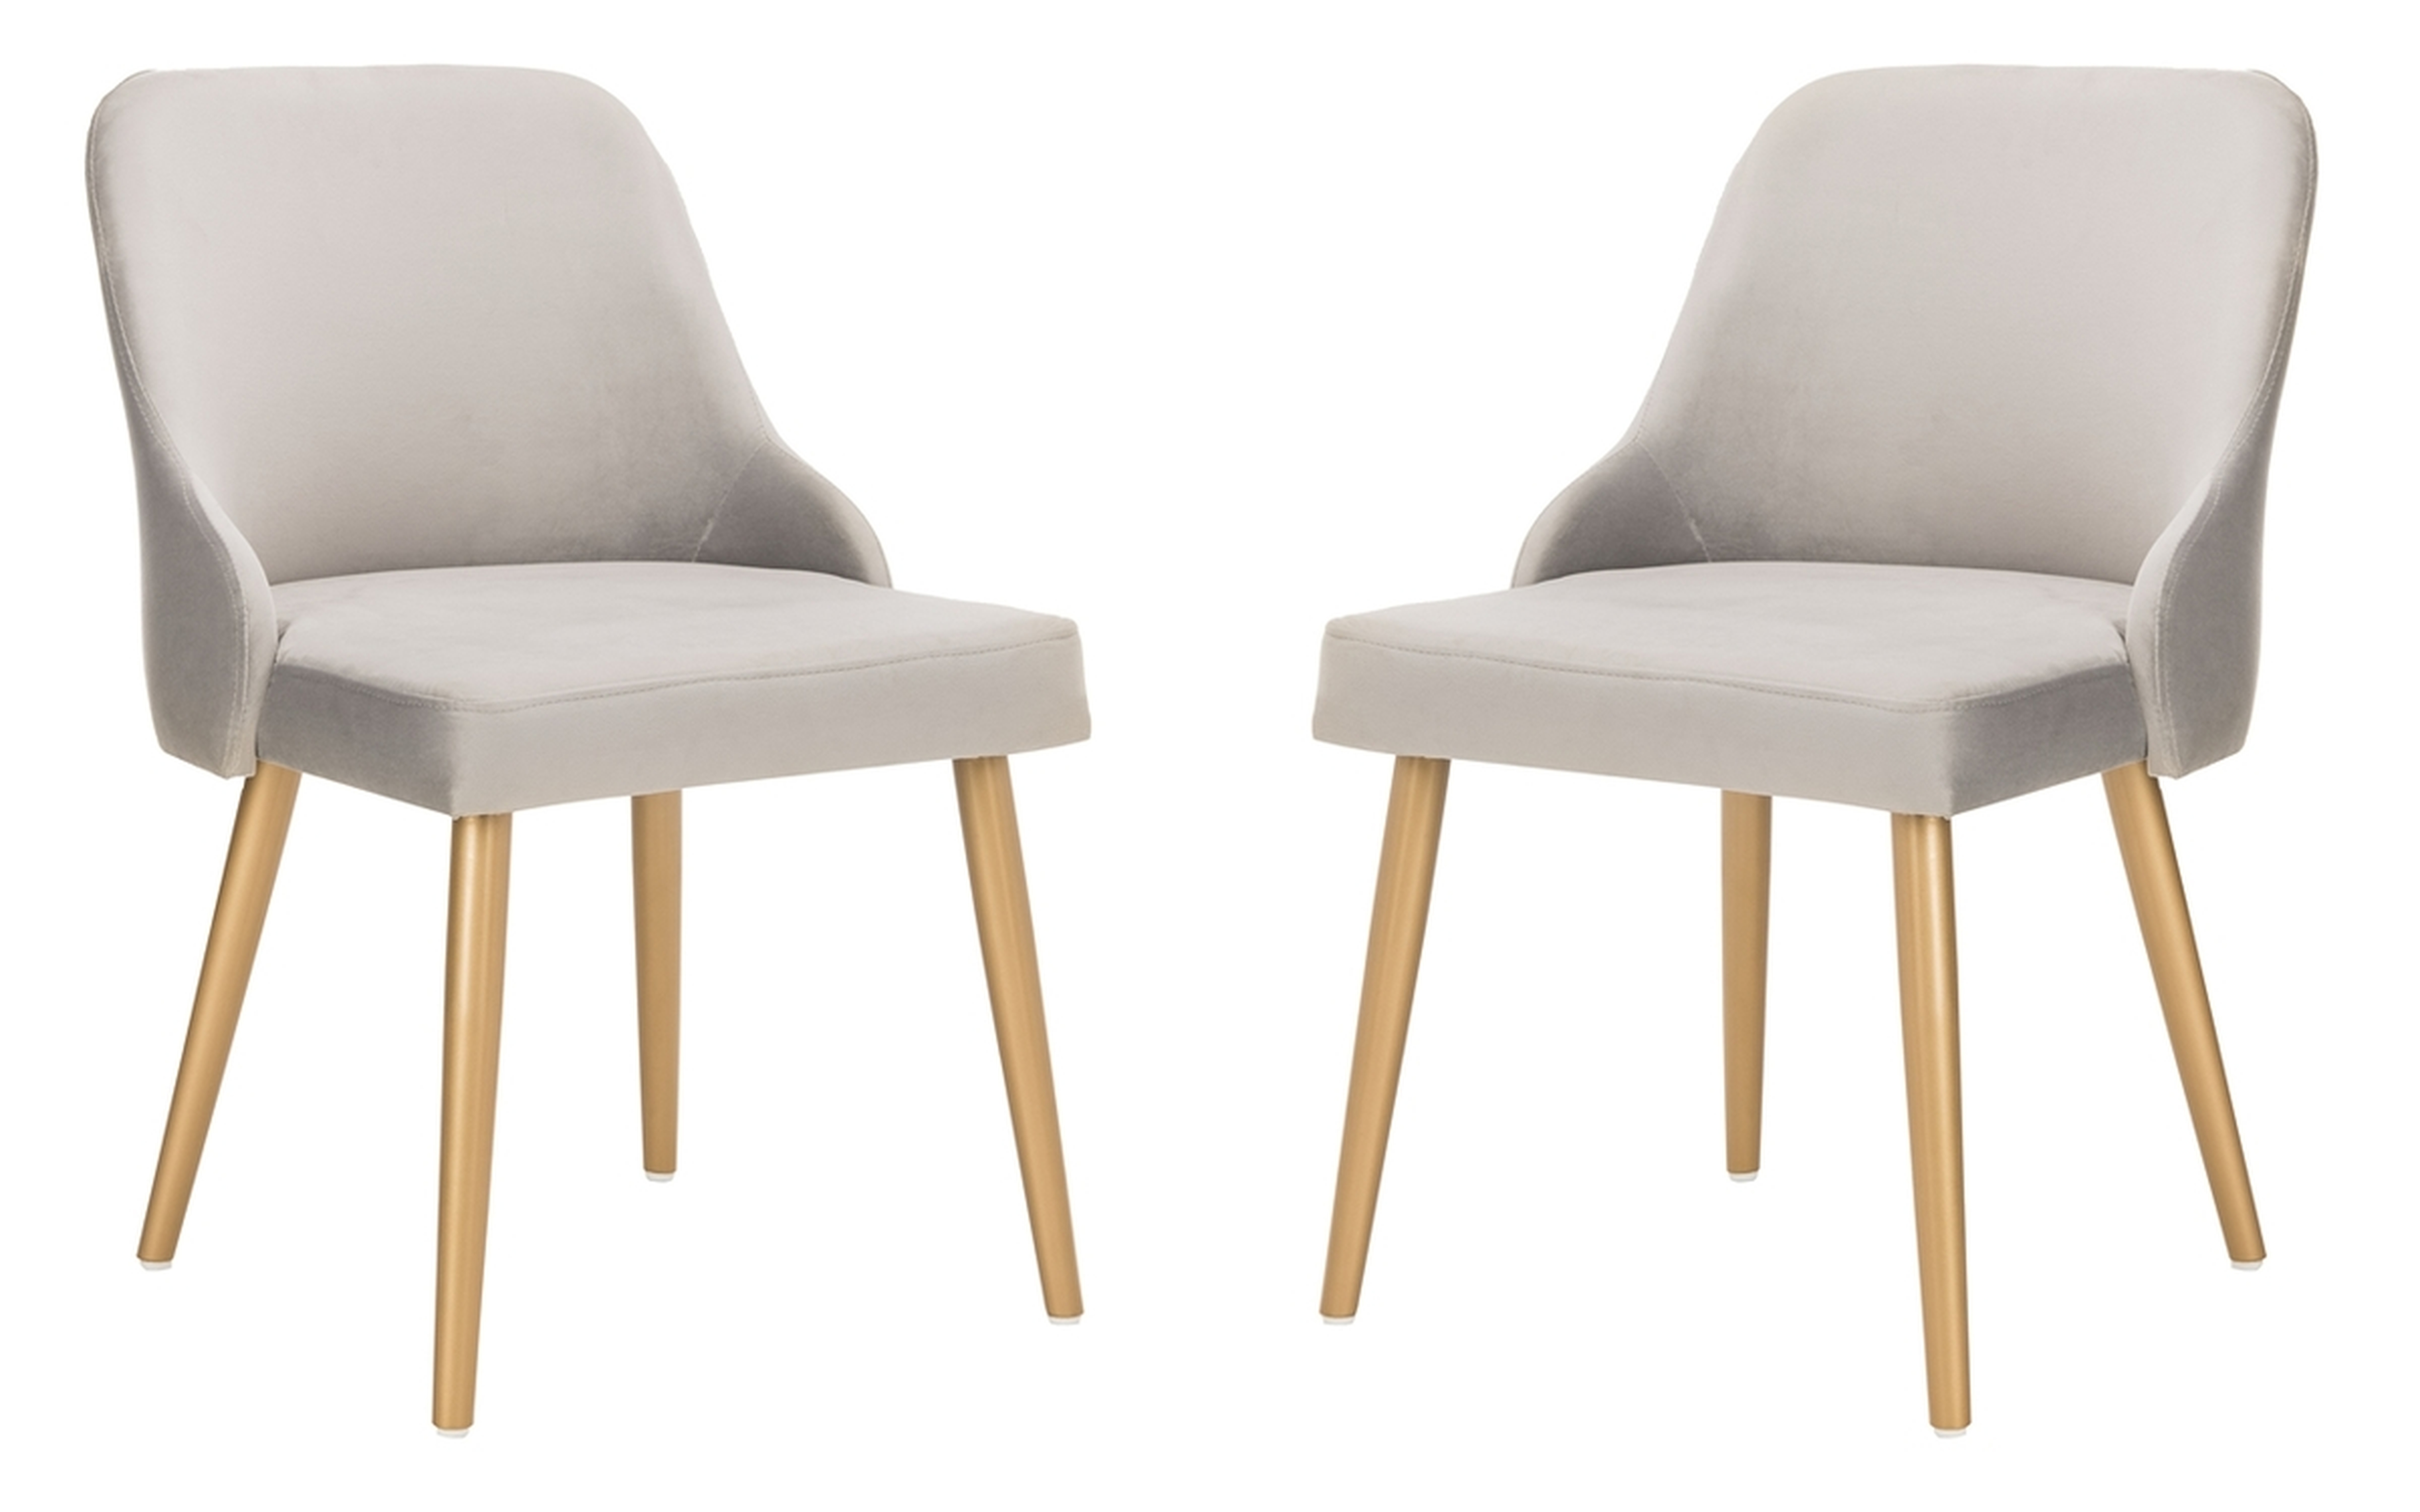 Lulu Upholstered Dining Chair (Set of 2) - Grey/Gold - Arlo Home - Arlo Home